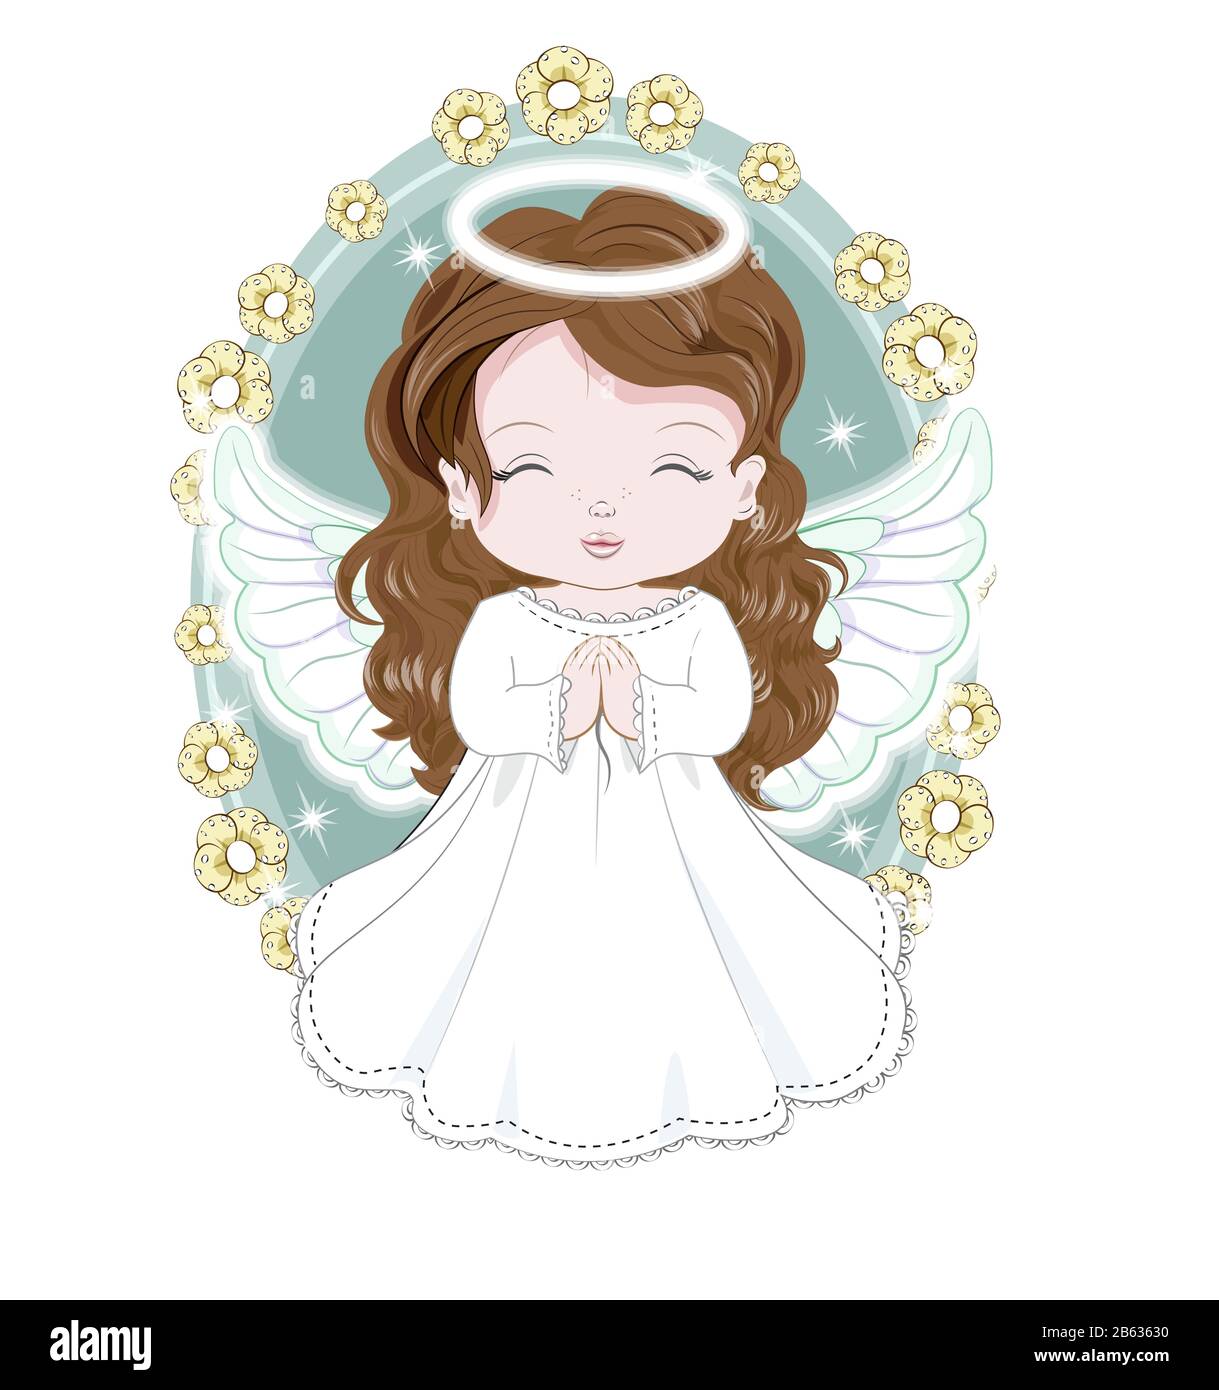 Baby angel Cut Out Stock Images & Pictures - Alamy